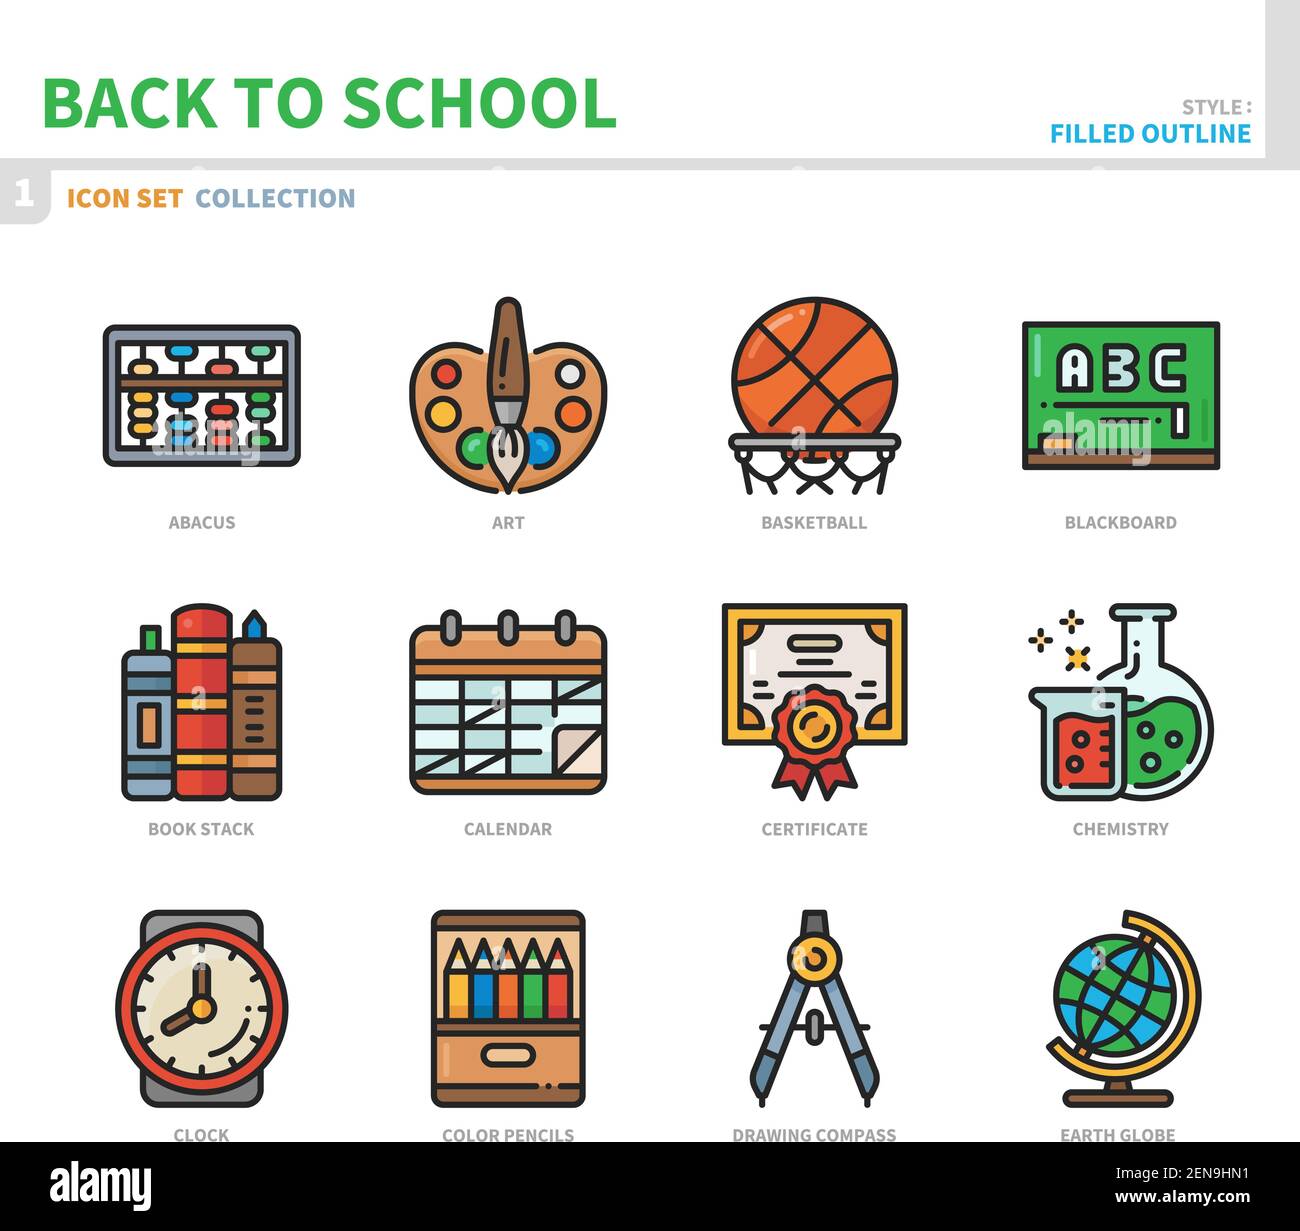 back to school icon set,filled outline style,vector and illustration Stock Vector